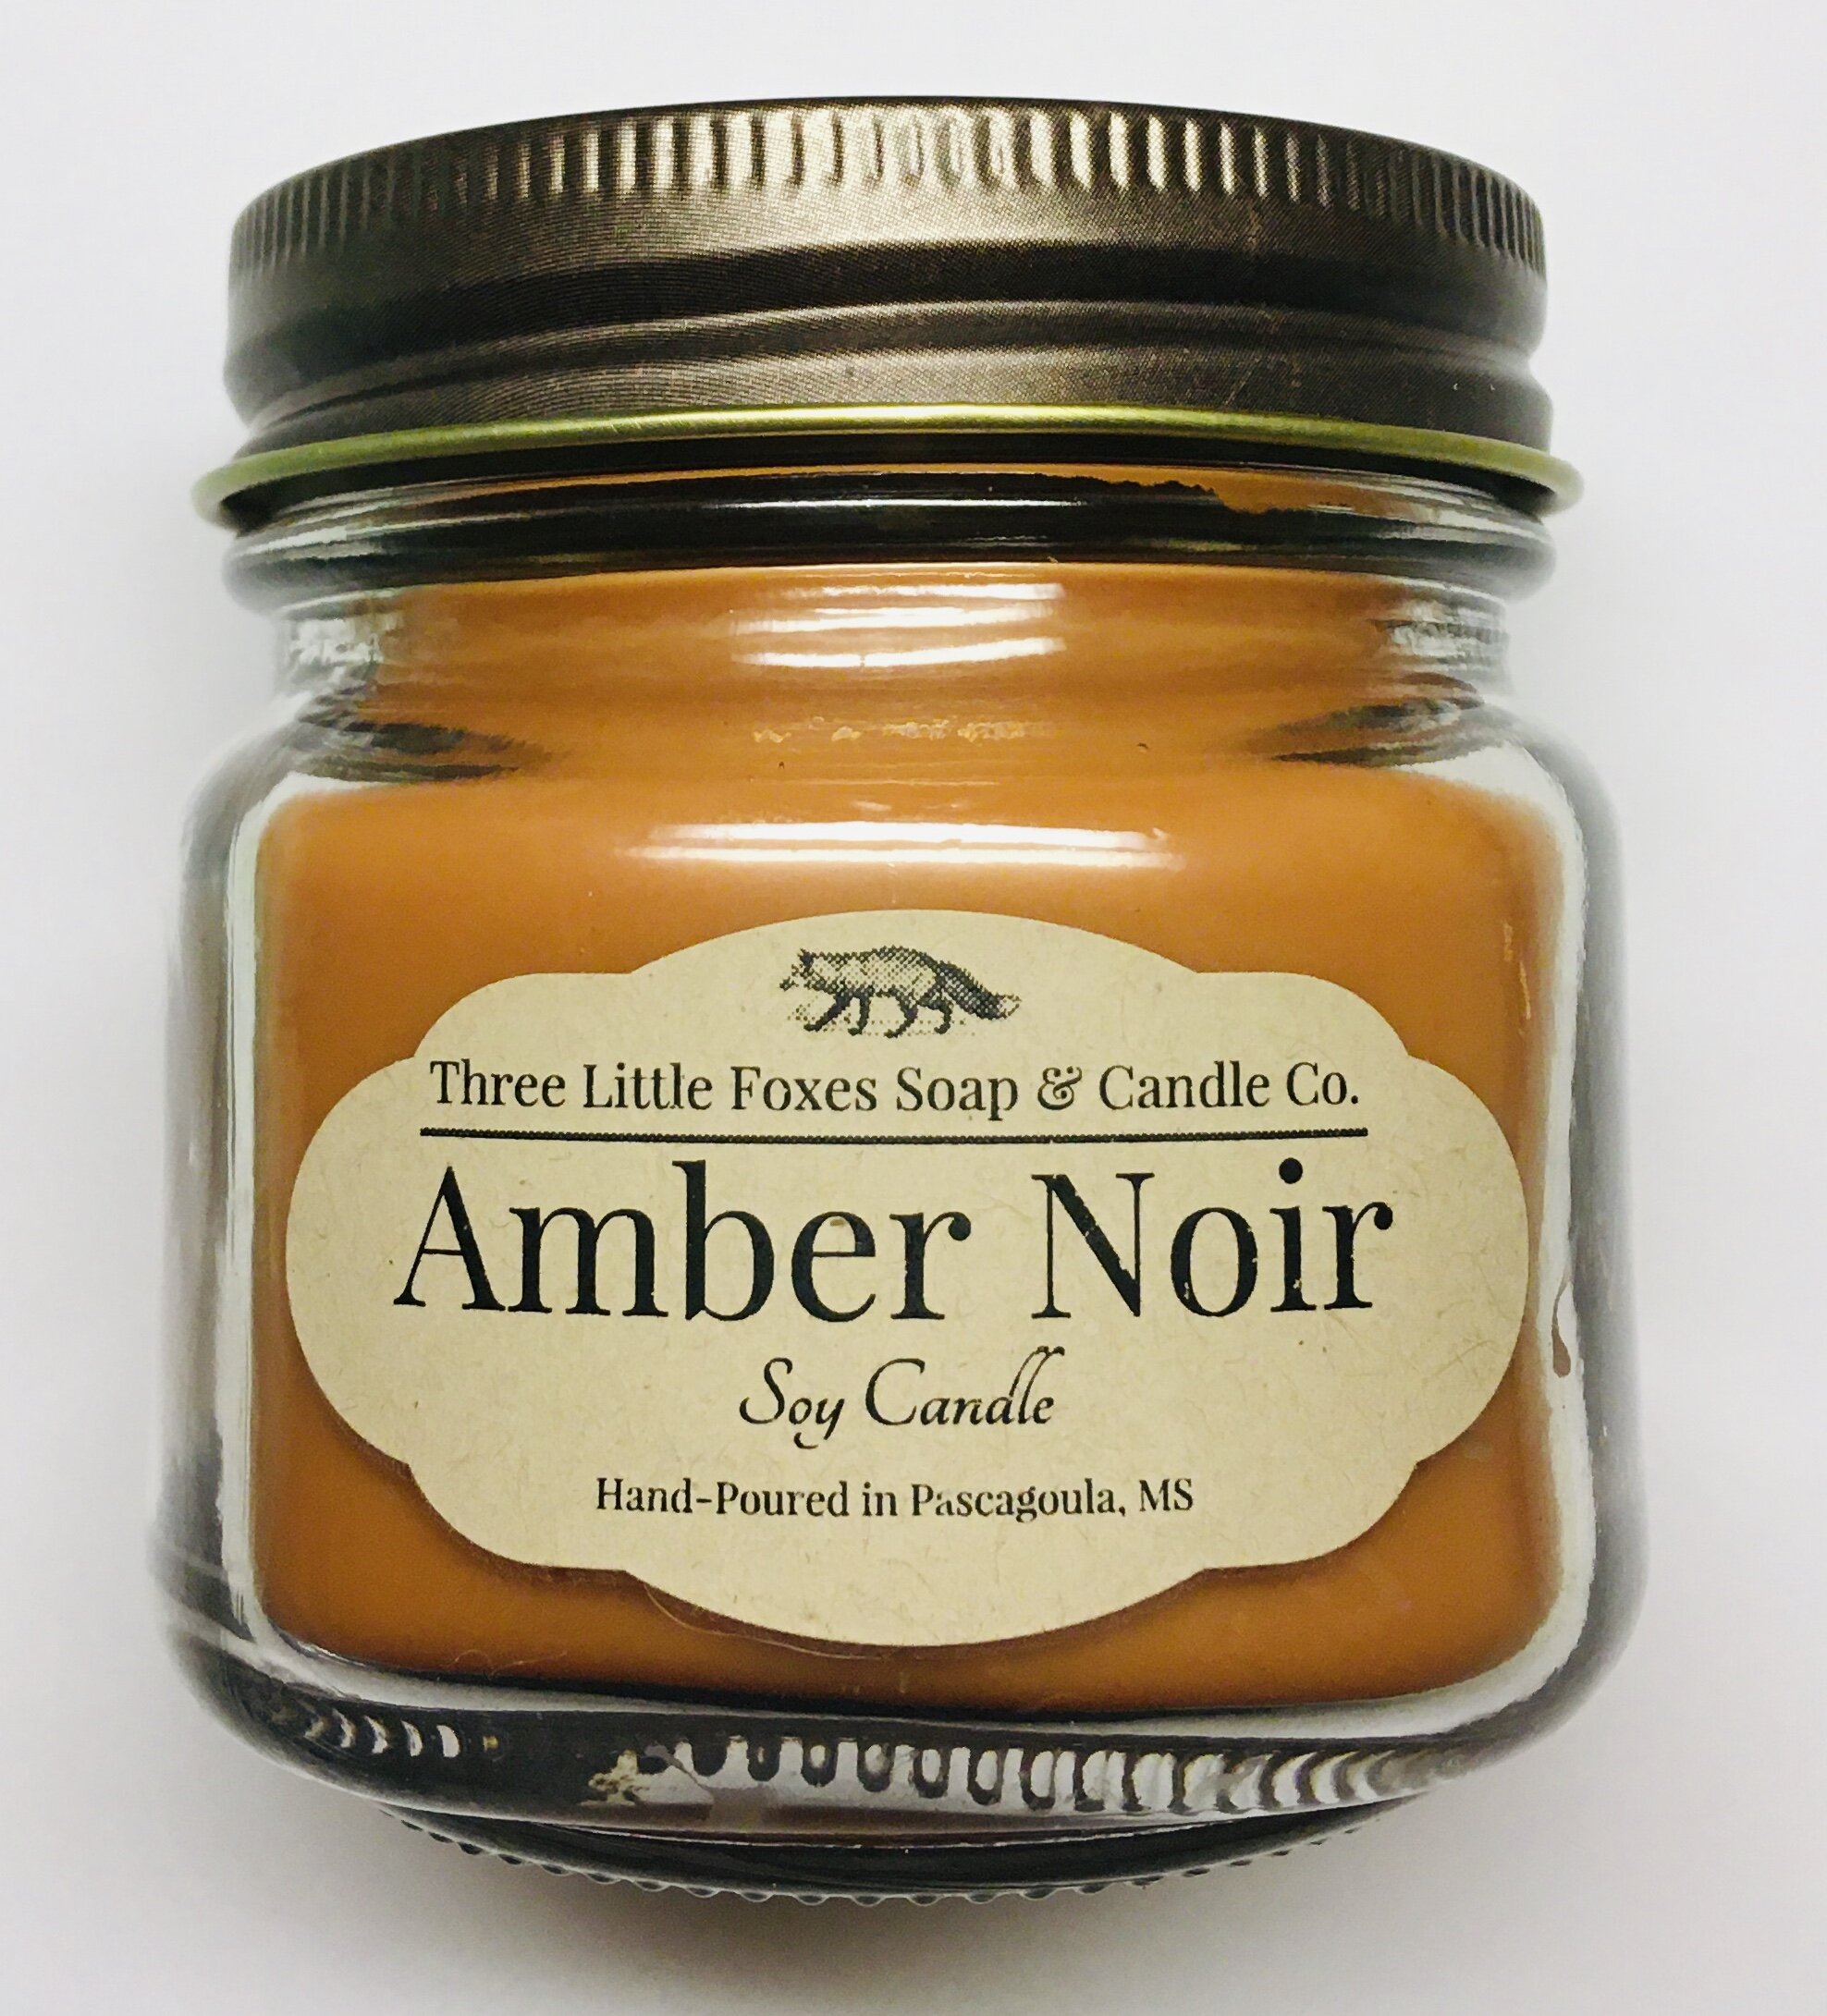 Amber Noir Soy Candles